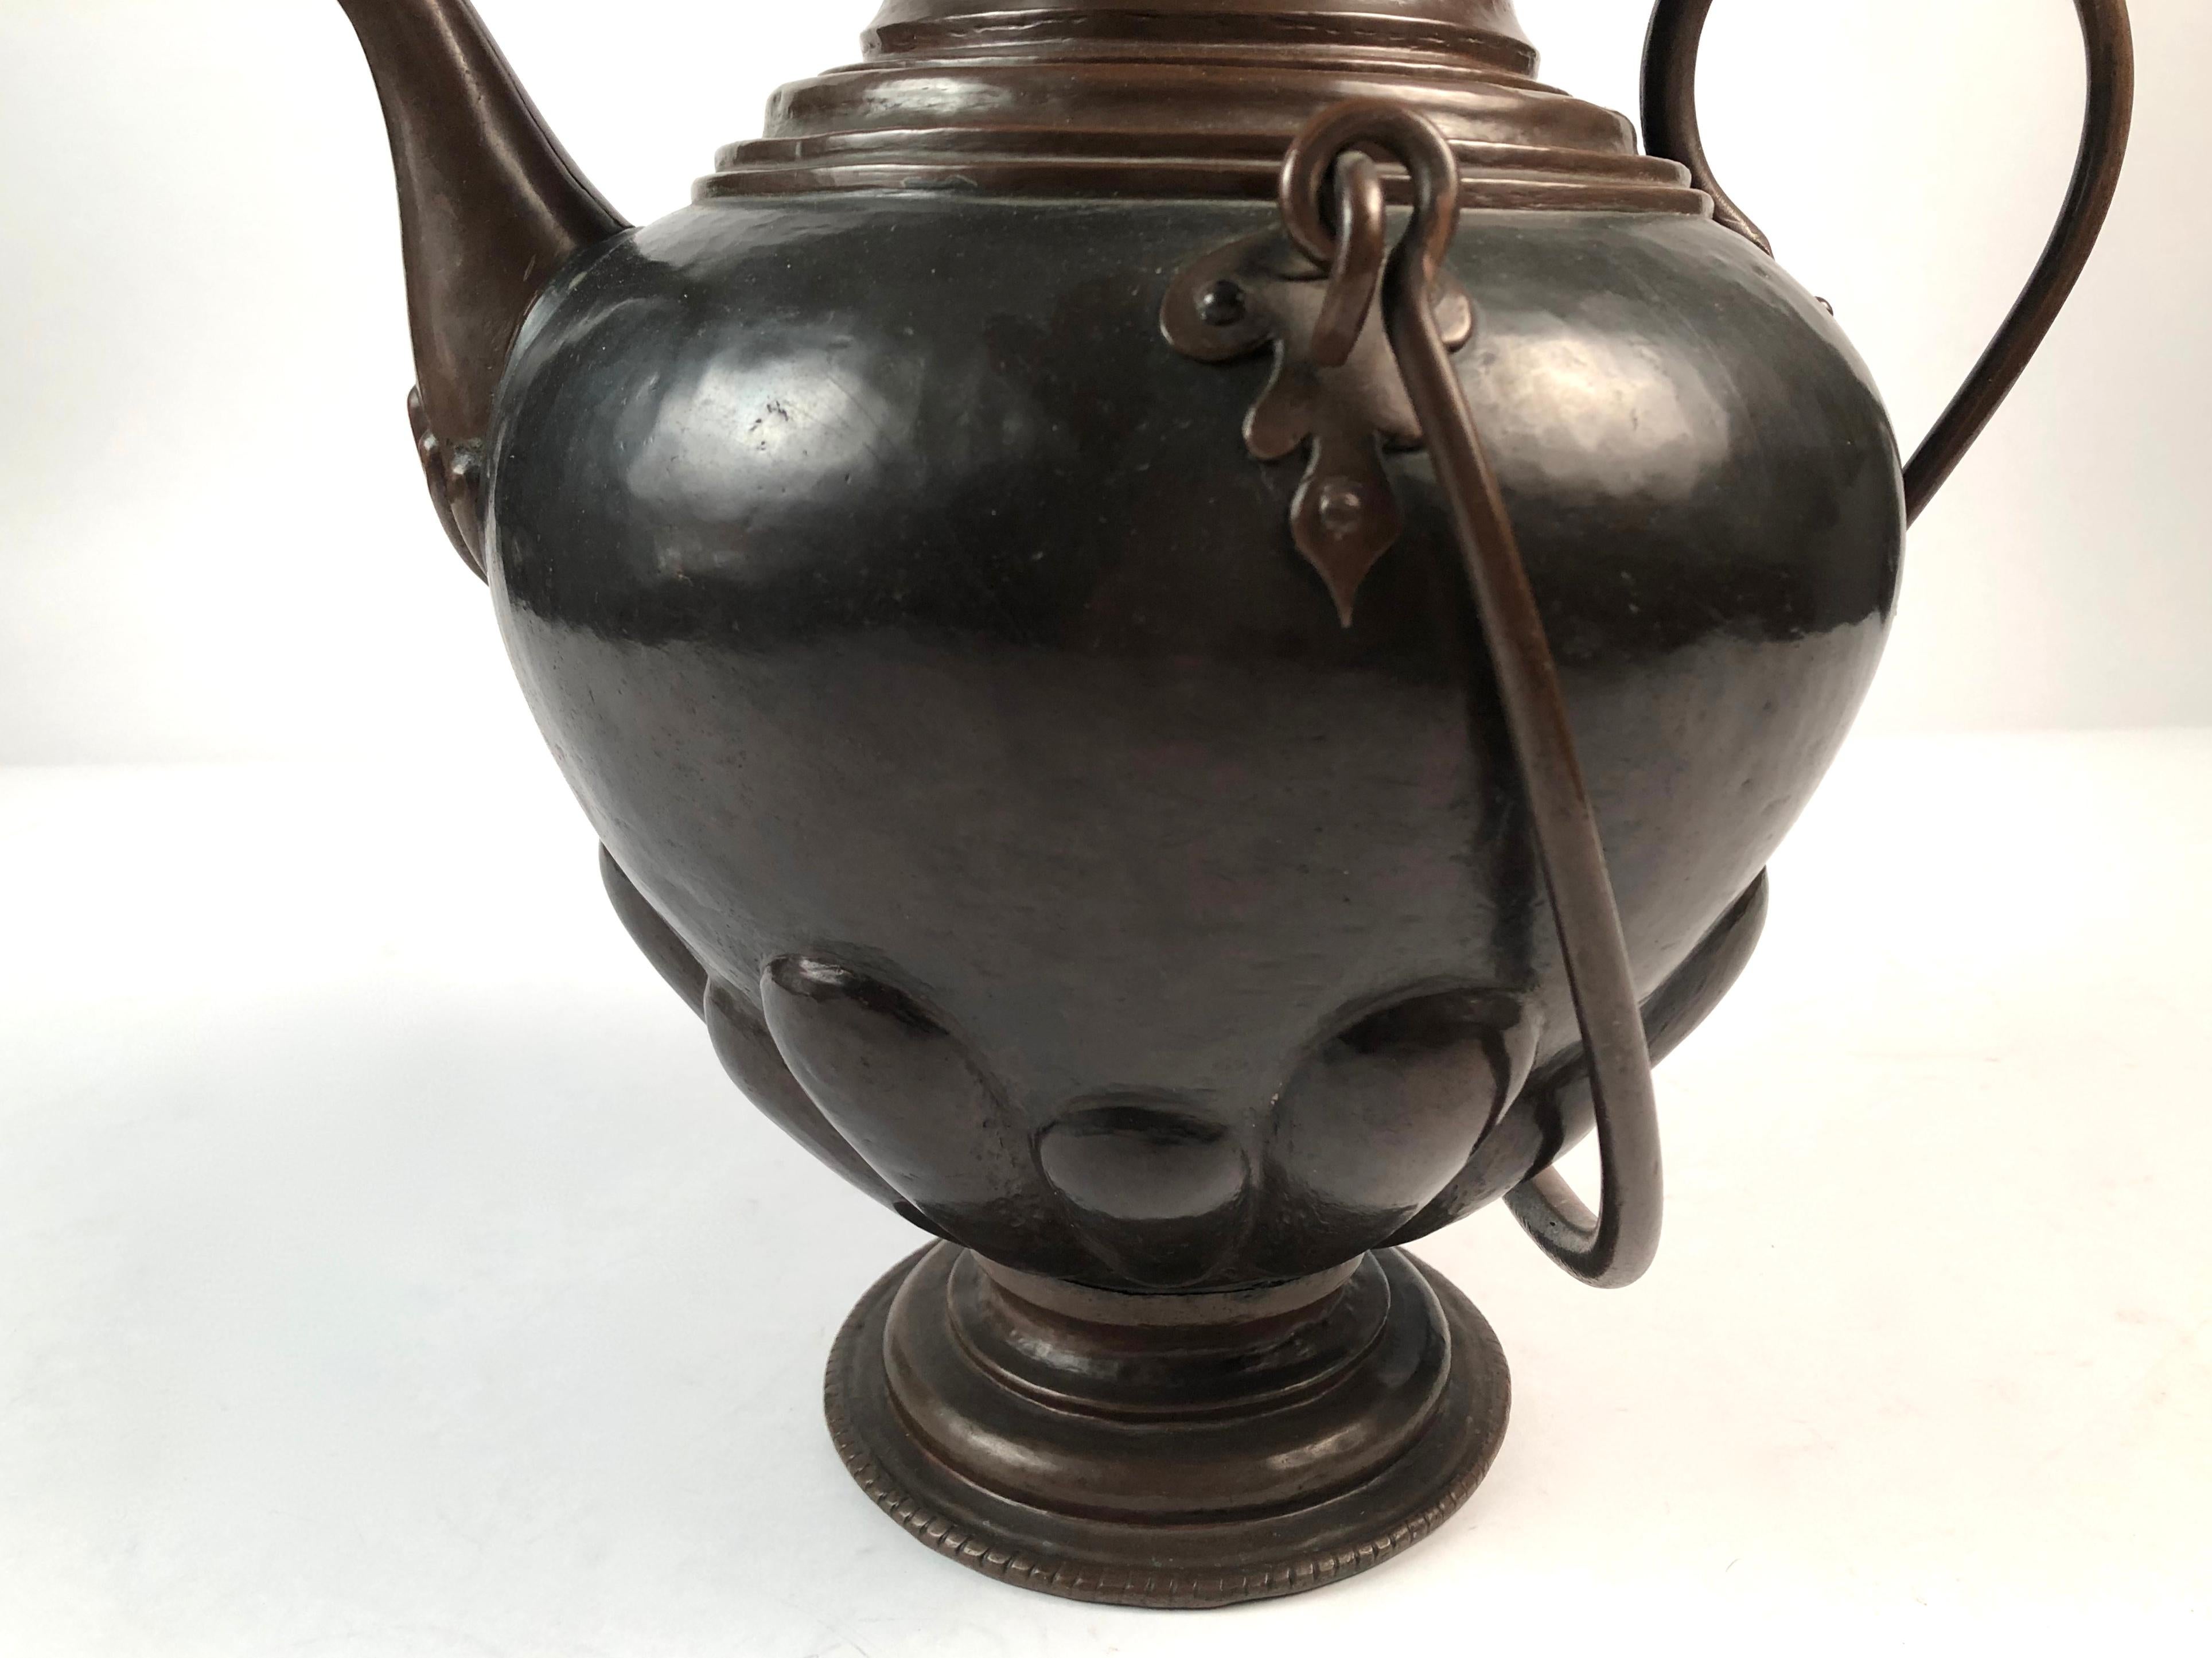 Hand-Crafted Baroque Style Copper Kettle